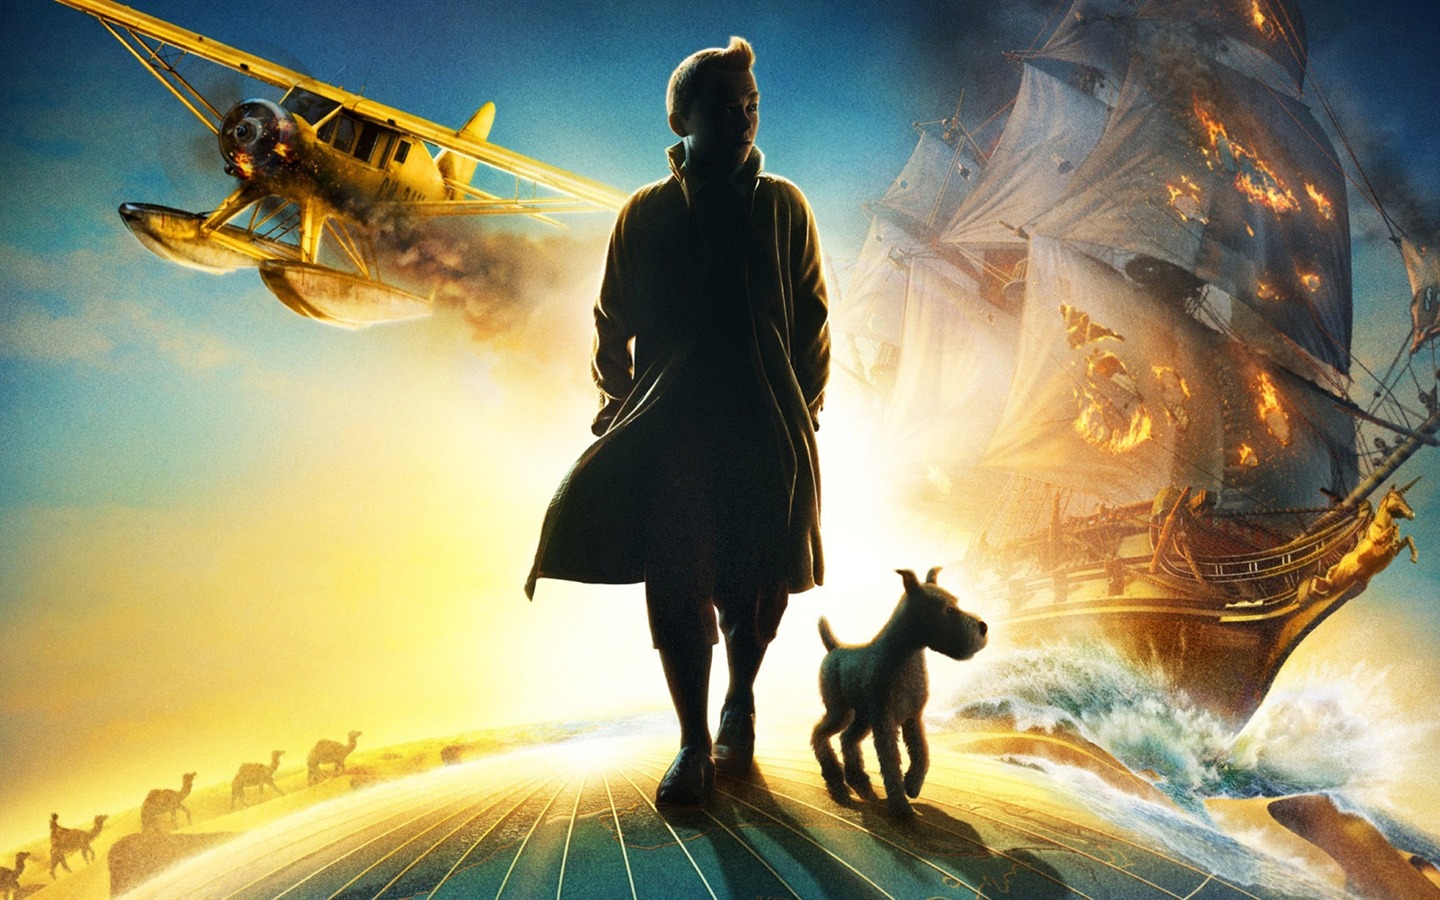 The Adventures of Tintin HD Wallpapers #1 - 1440x900